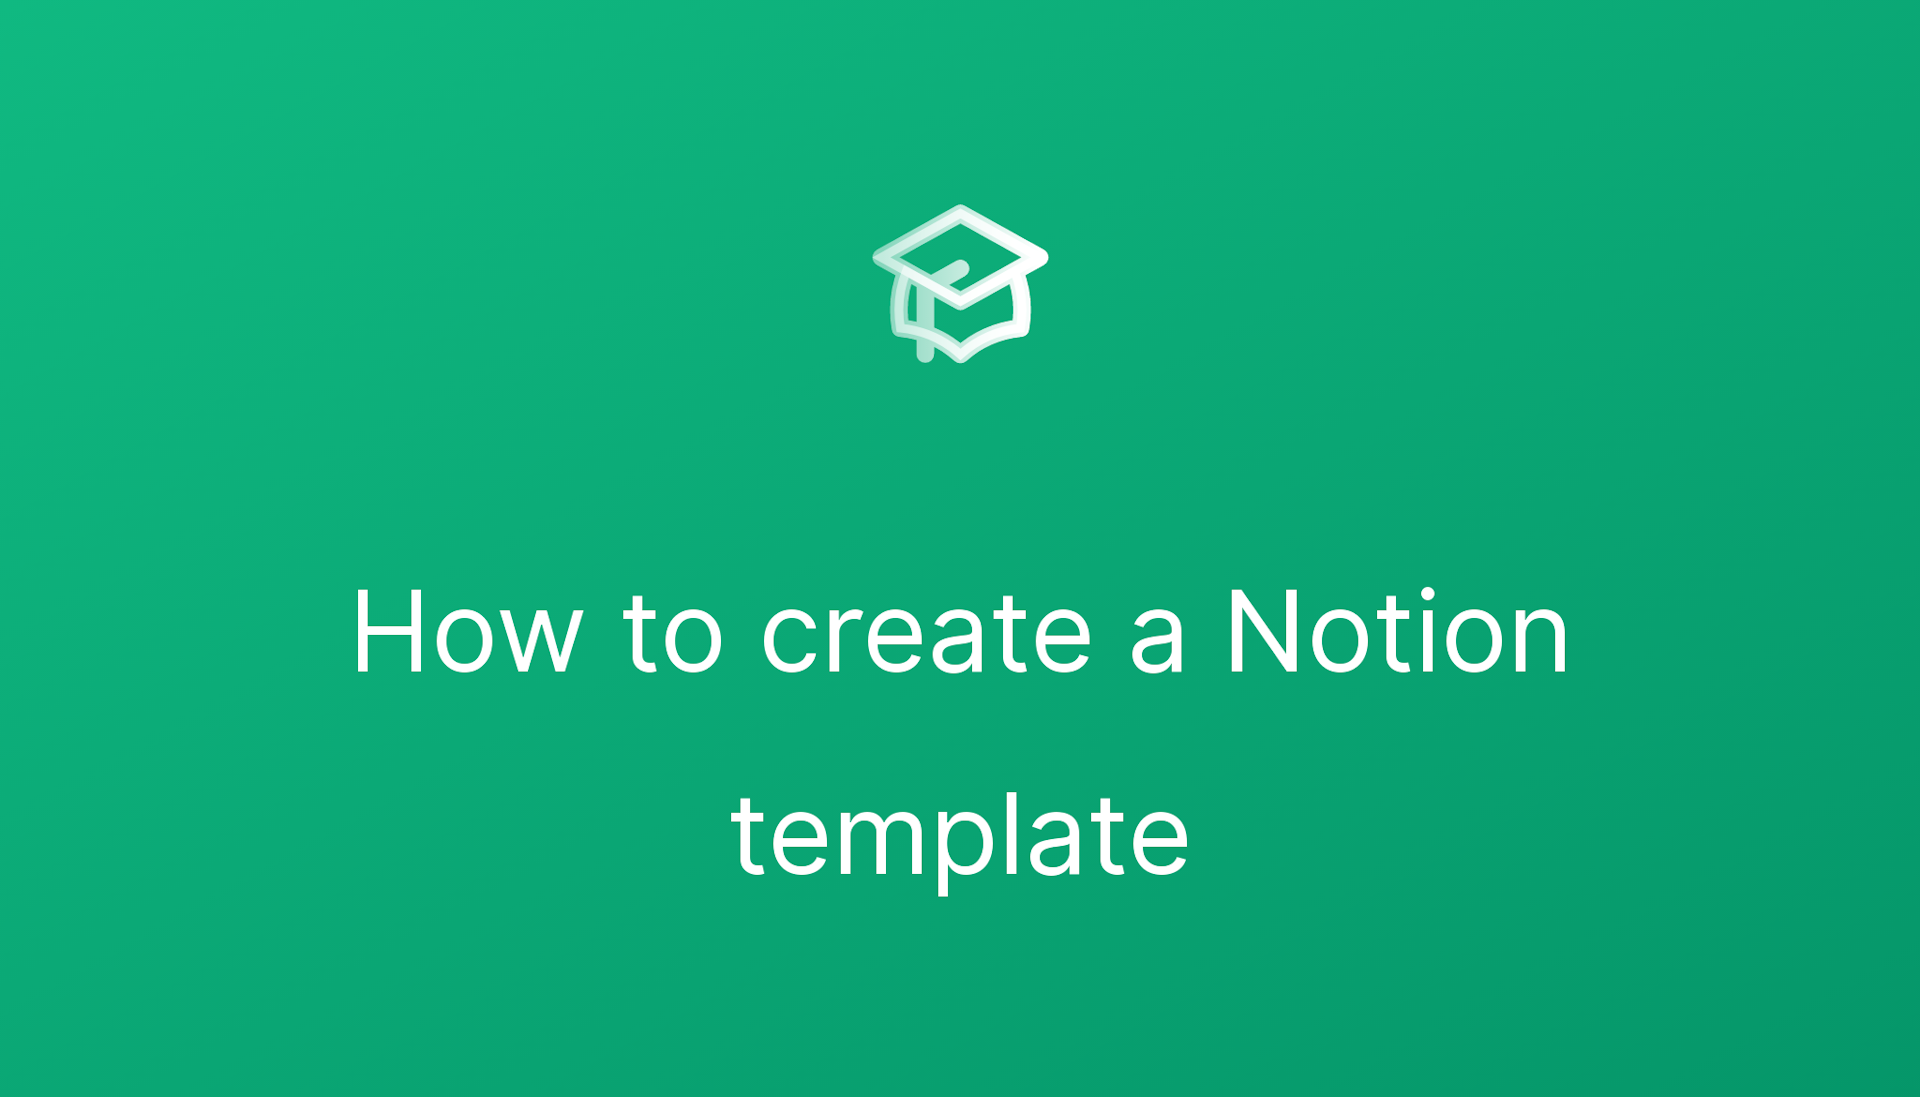 How to create a Notion template